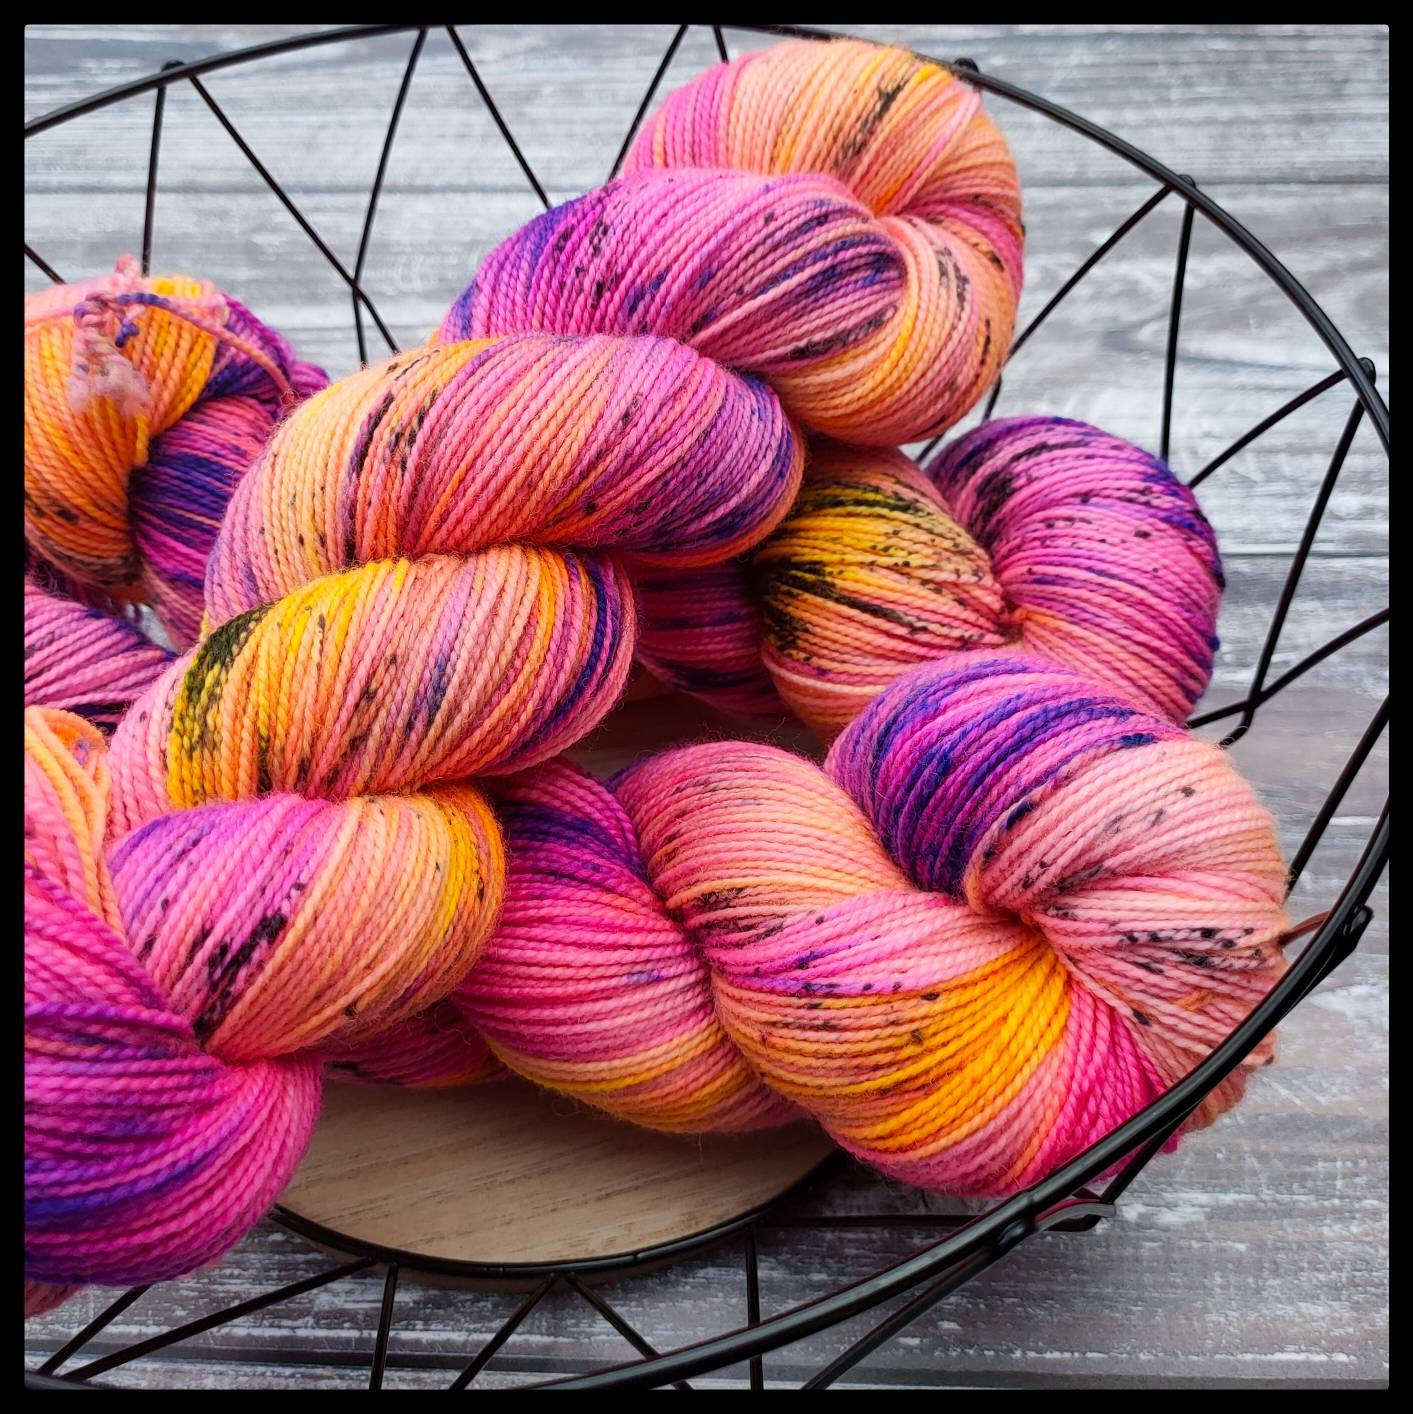 Worsted Weight Yarn, Hand Dyed, Speckled Yarn, Superwash Merino, Hand Dyed  Yarn 100 G/218 Yds/worsted Yarn Surprise Party 